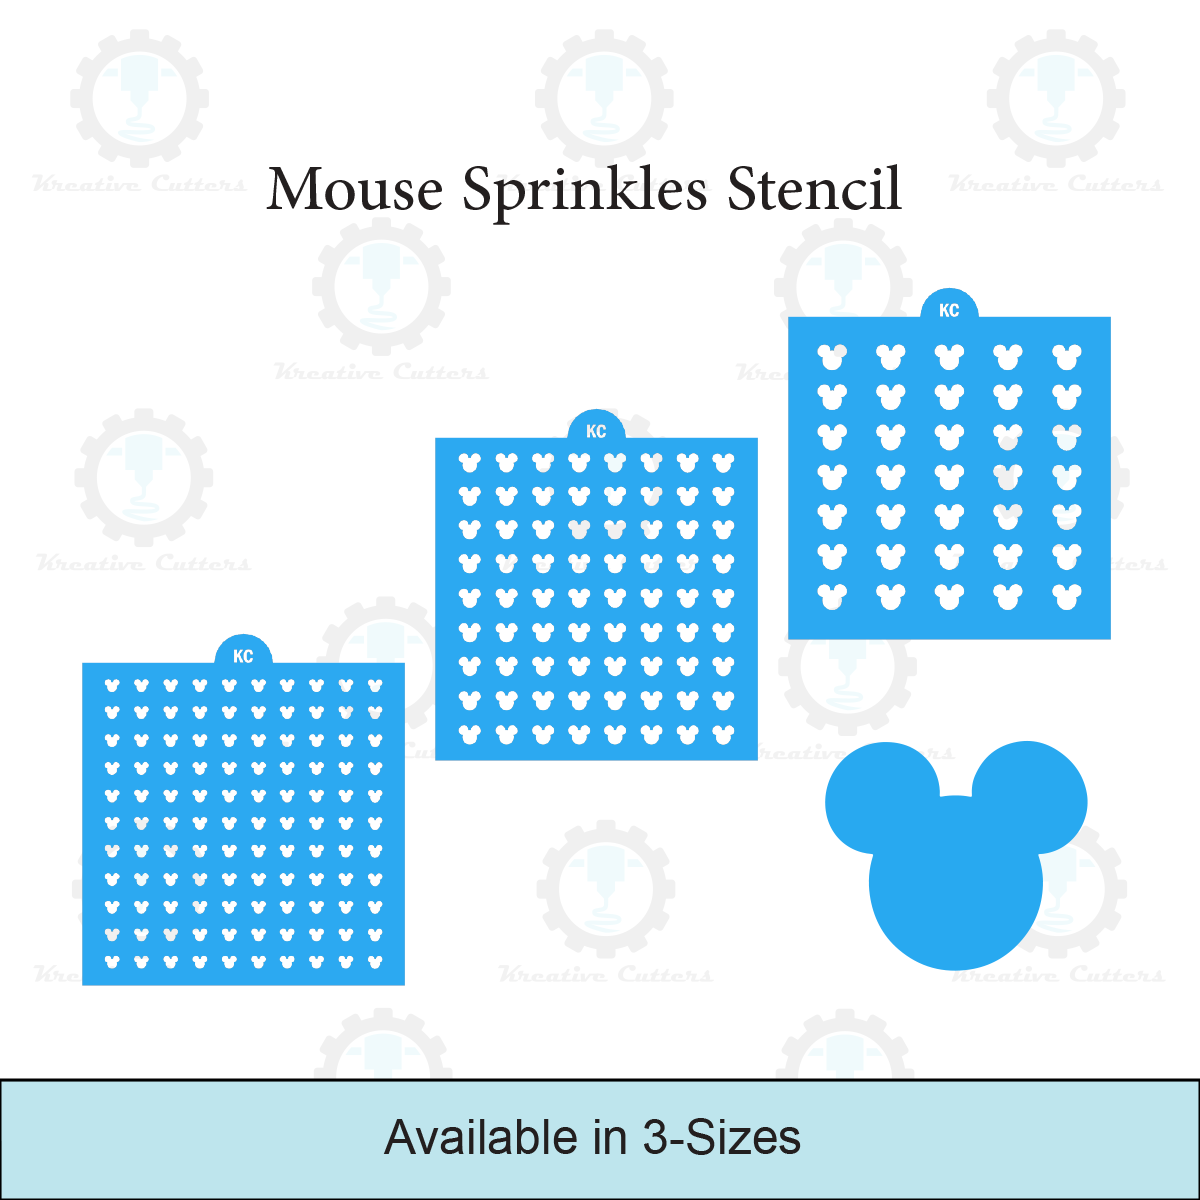 Mouse Sprinkles Stencil | 3D Printed, Cookie, Cake, & Cupcake, Decorating Stencils